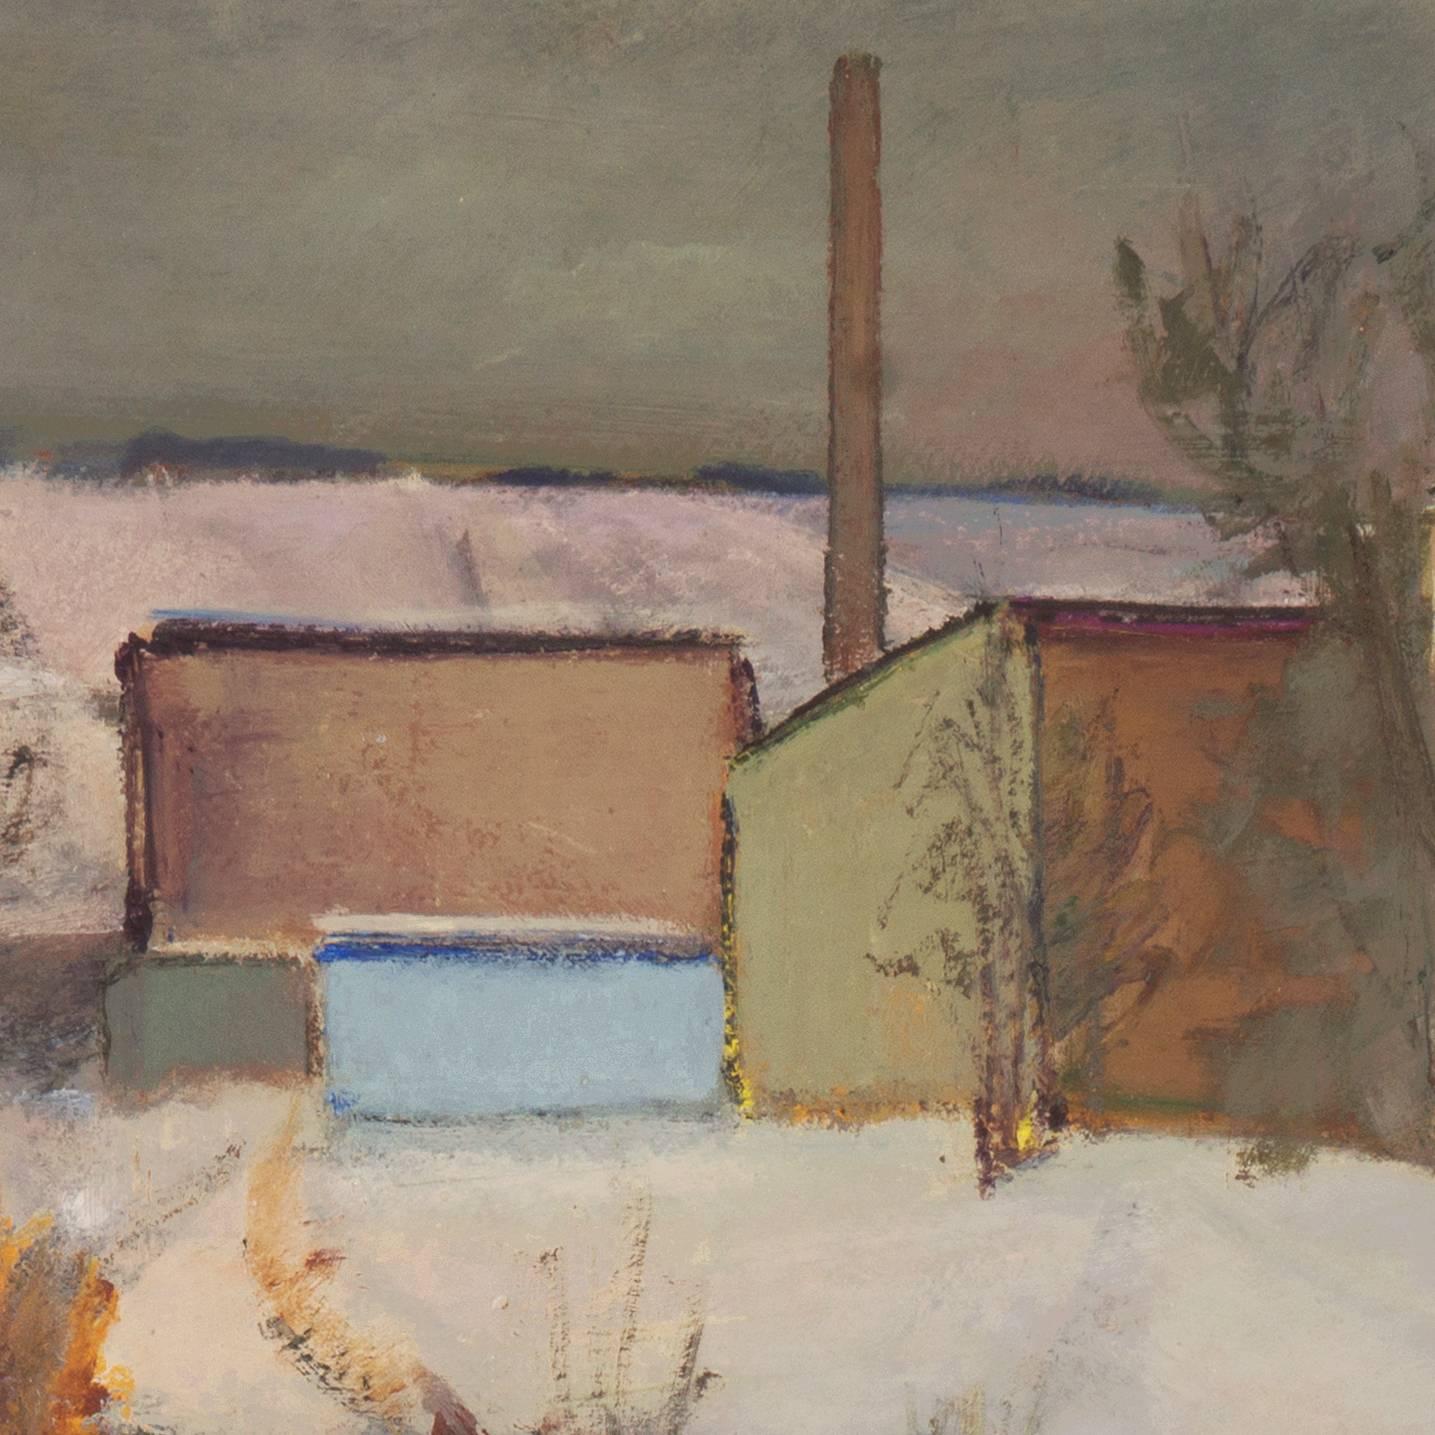 A substantial and atmospheric winter landscape showing a view of fields and farm buildings draped in snow.

Signed with initials lower right, 'V.G.K.' for Victor Georg Kuhnel, (Danish, 1889-1971) and dated 1942; old Charlottenborg exhibition label